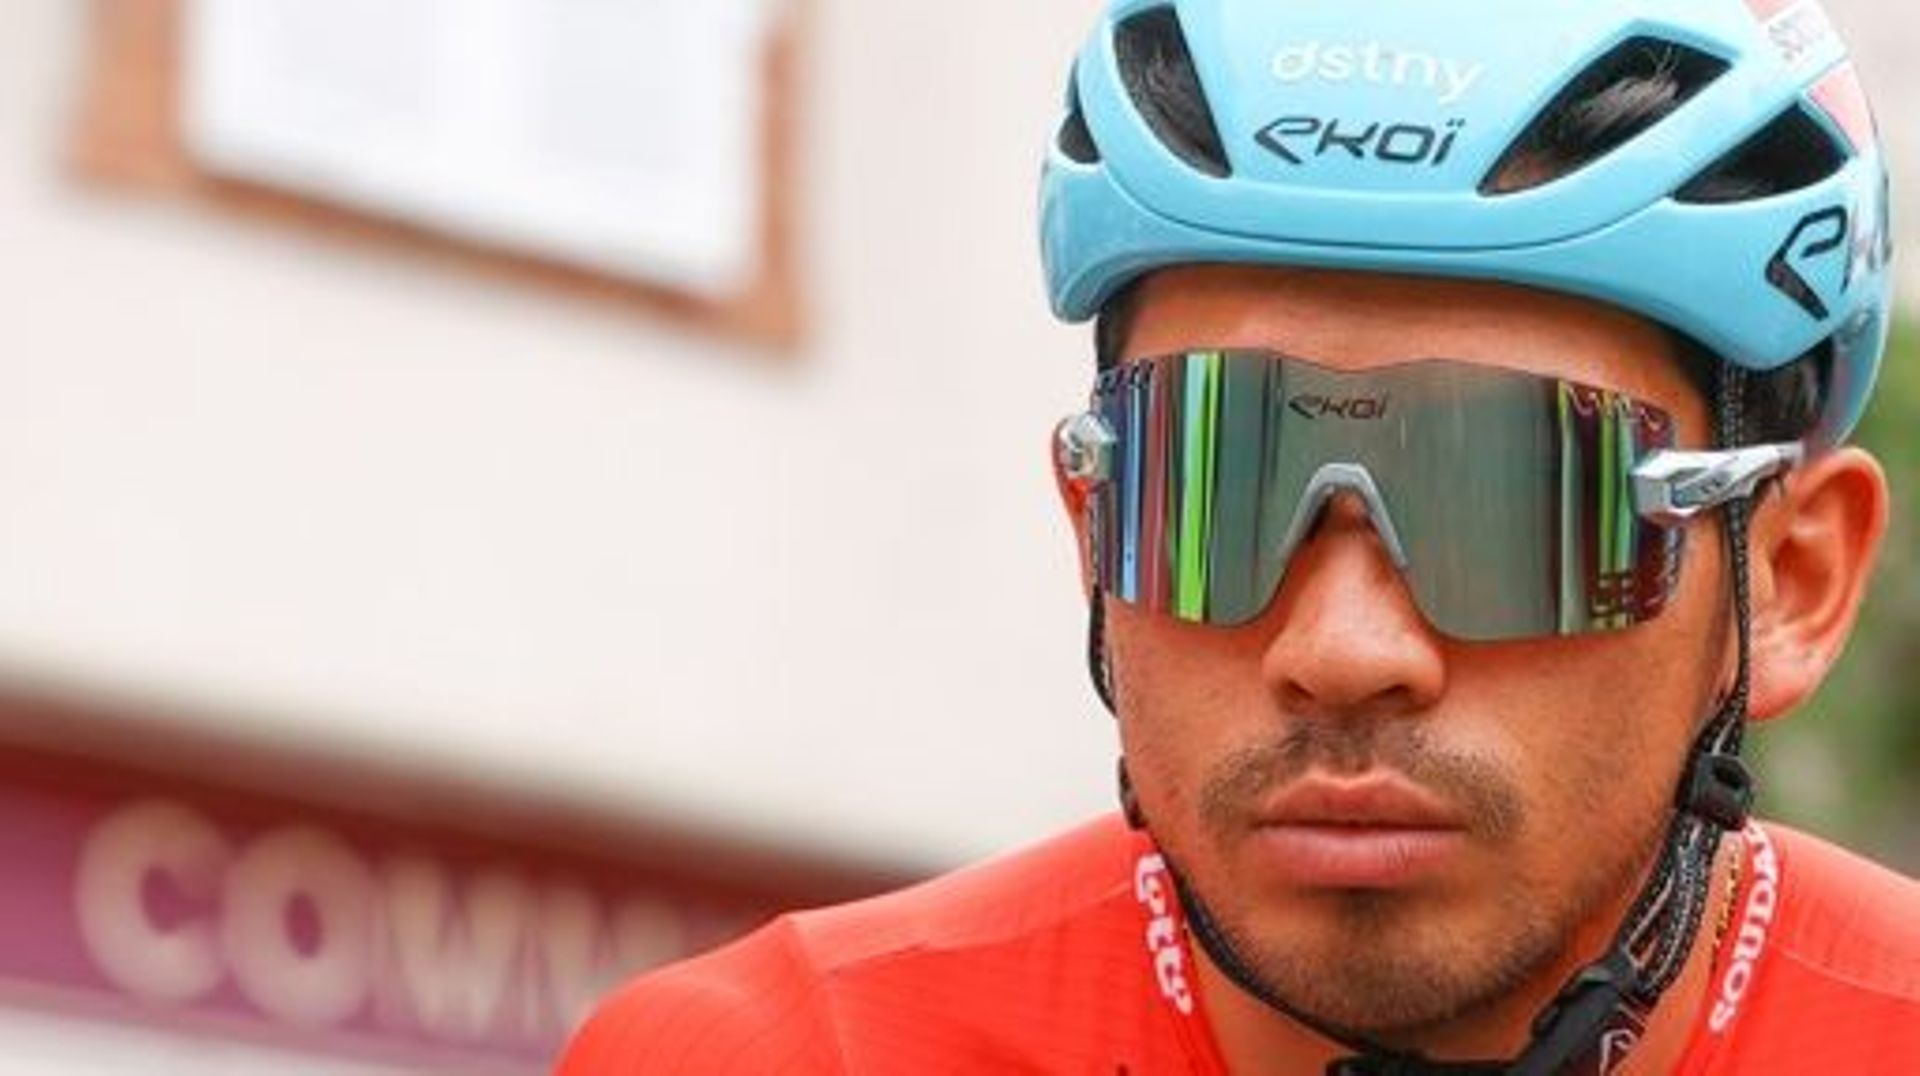 Australian Caleb Ewan of Lotto Soudal pictured at the start of stage 17 of the Tour de France cycling race, from Saint-Gaudens to Peyragudes (130 km), France, on Wednesday 20 July 2022. This year’s Tour de France takes place from 01 to 24 July 2022. BELGA